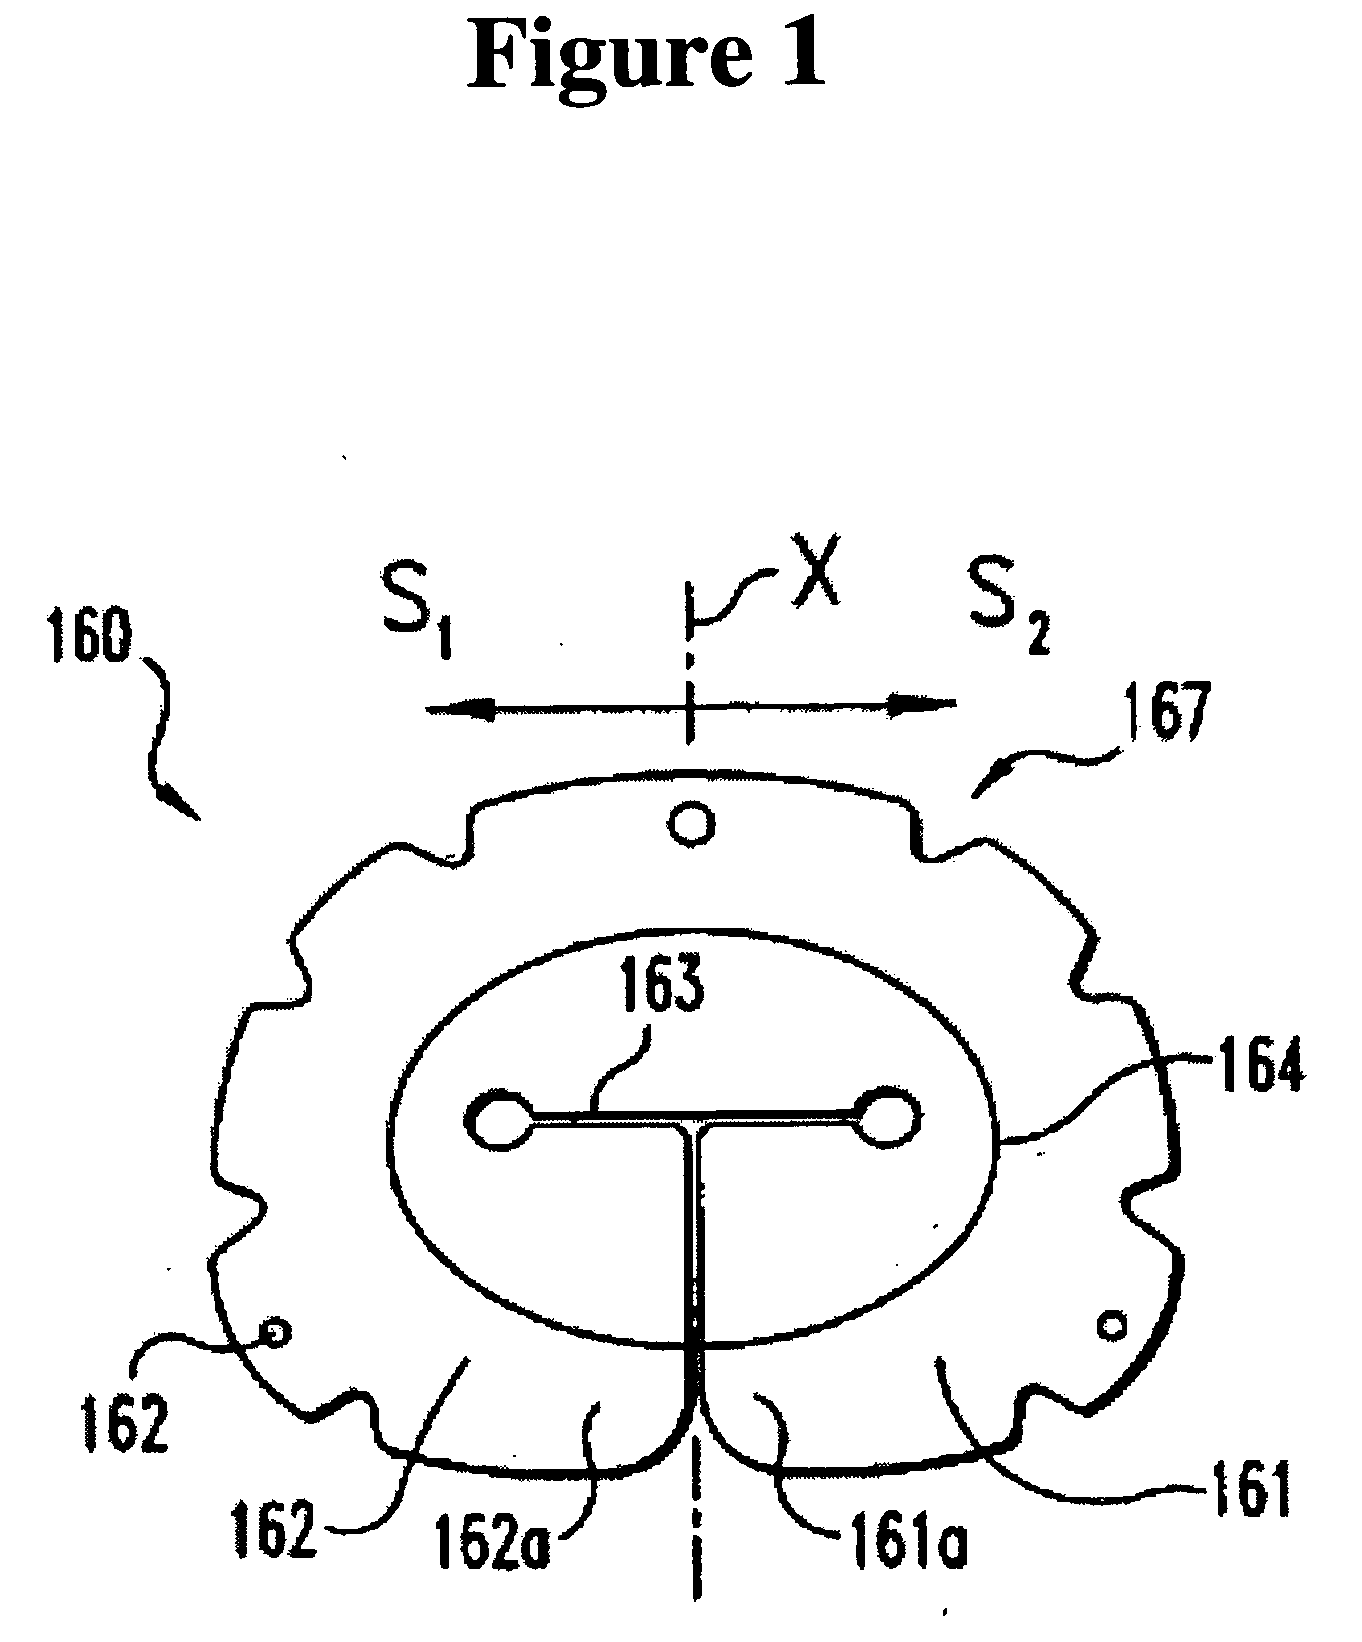 In-situ formable nucleus pulposus implant with water absorption and swelling capability